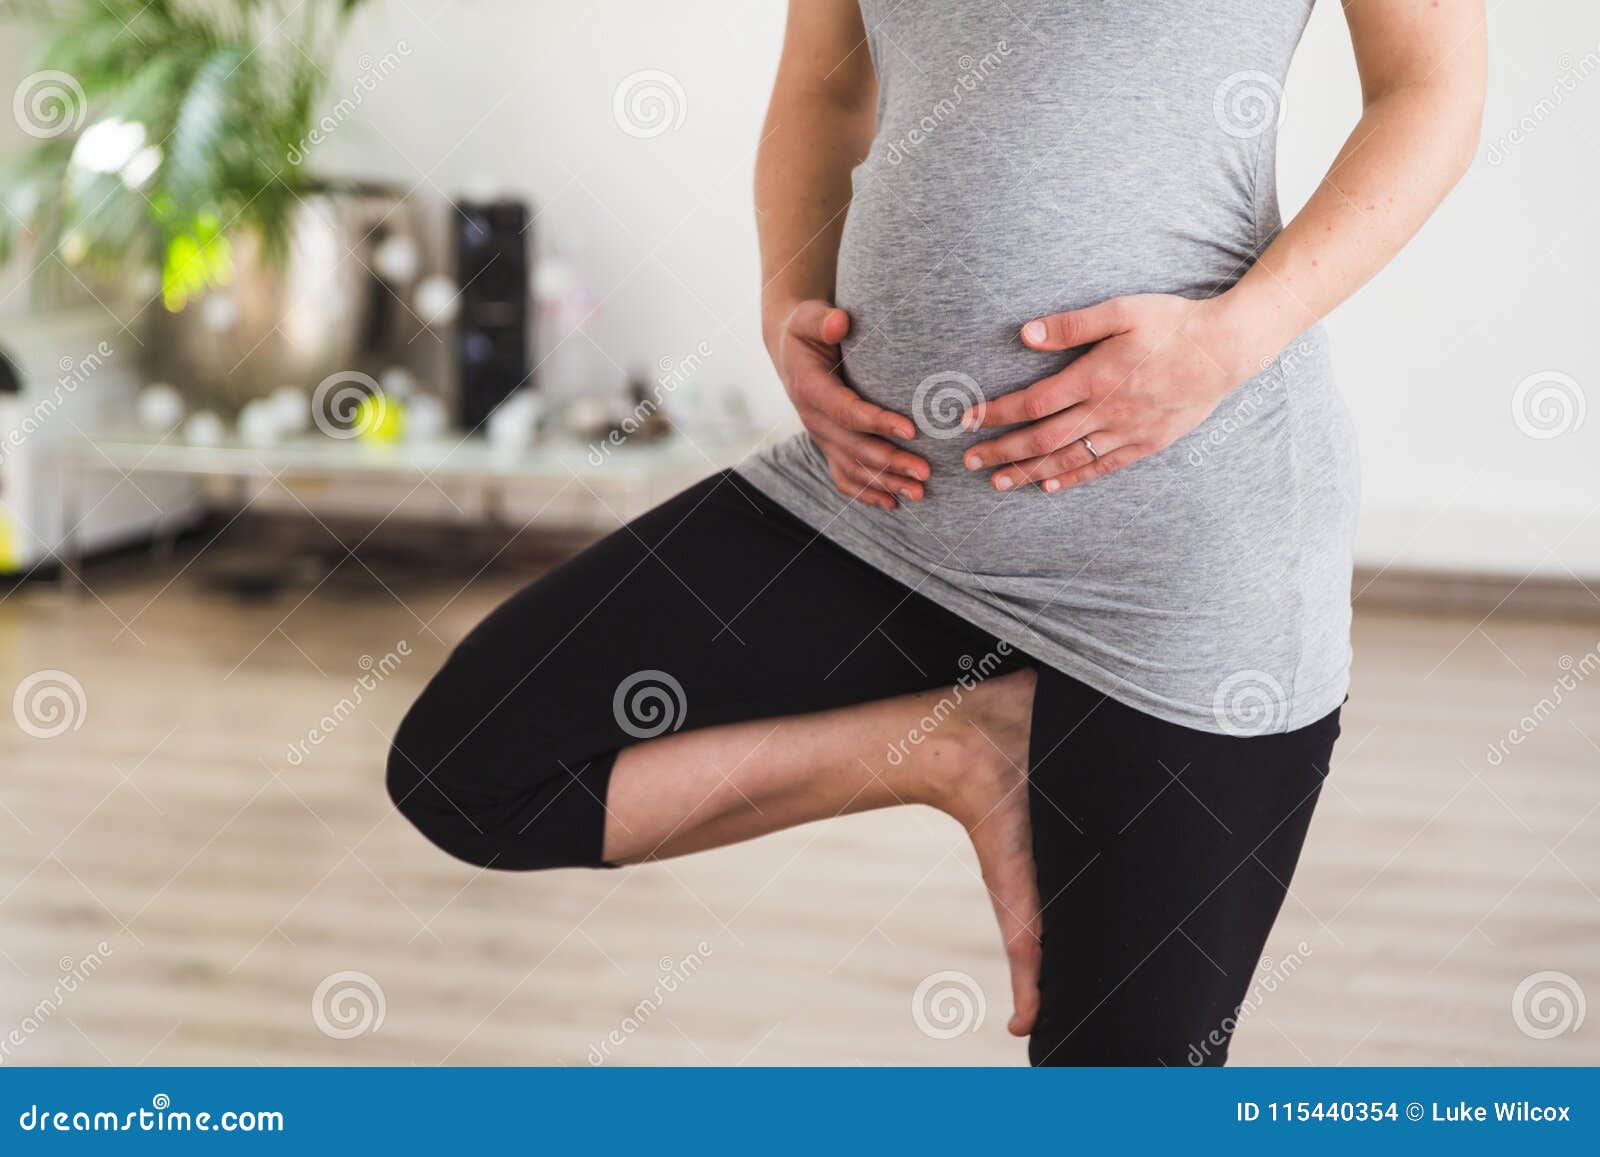 young pregnant woman standing in tree pose doing prenatal yoga holding belly